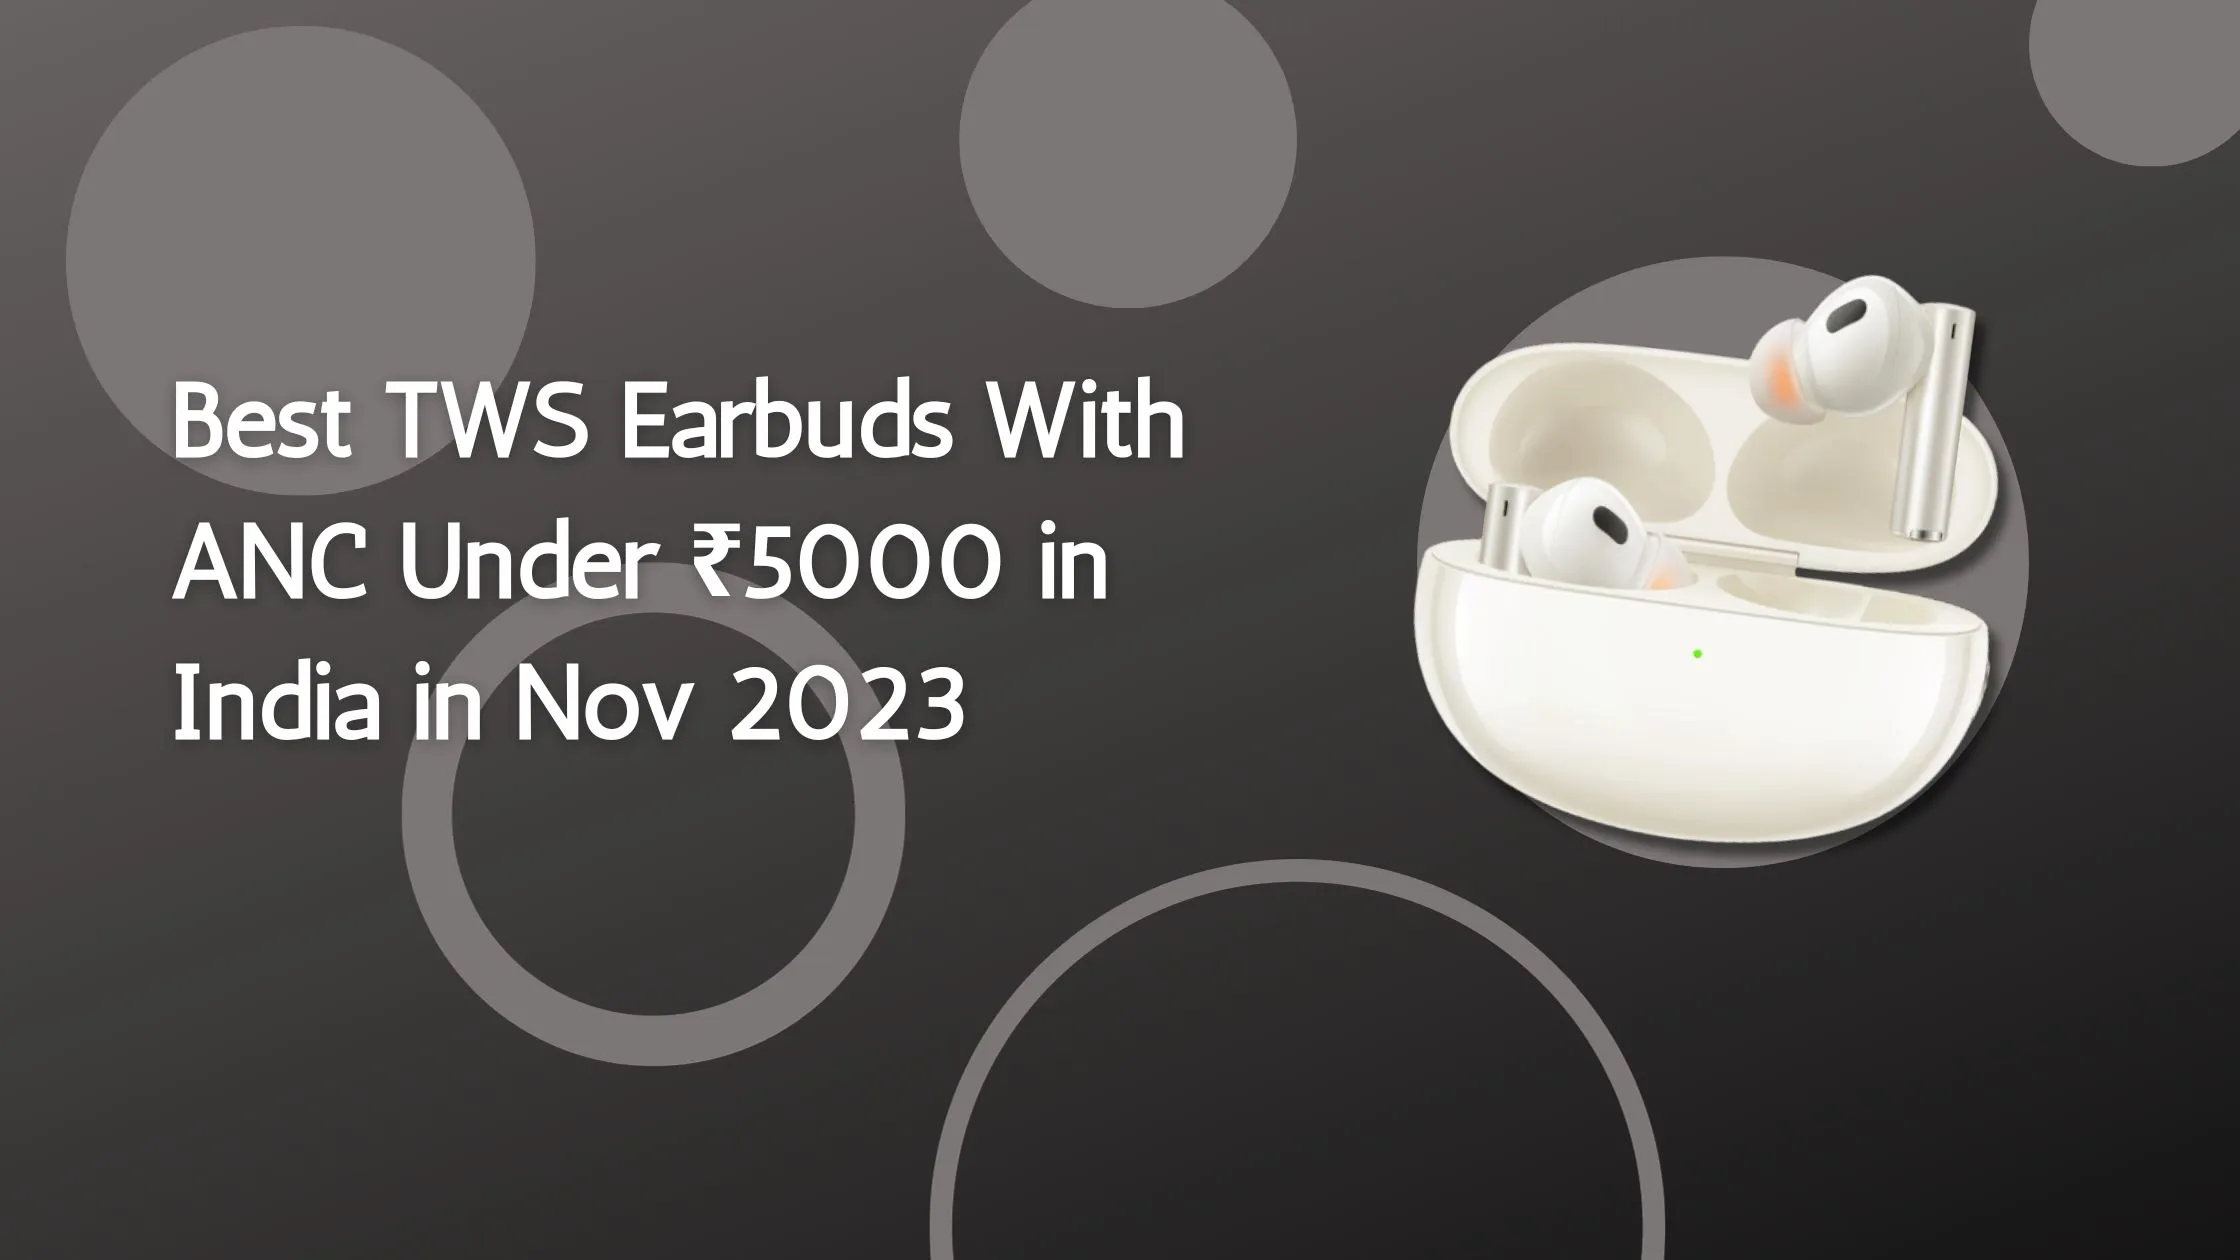 Best TWS Earbuds with ANC under 5000 in india in Nov 2023